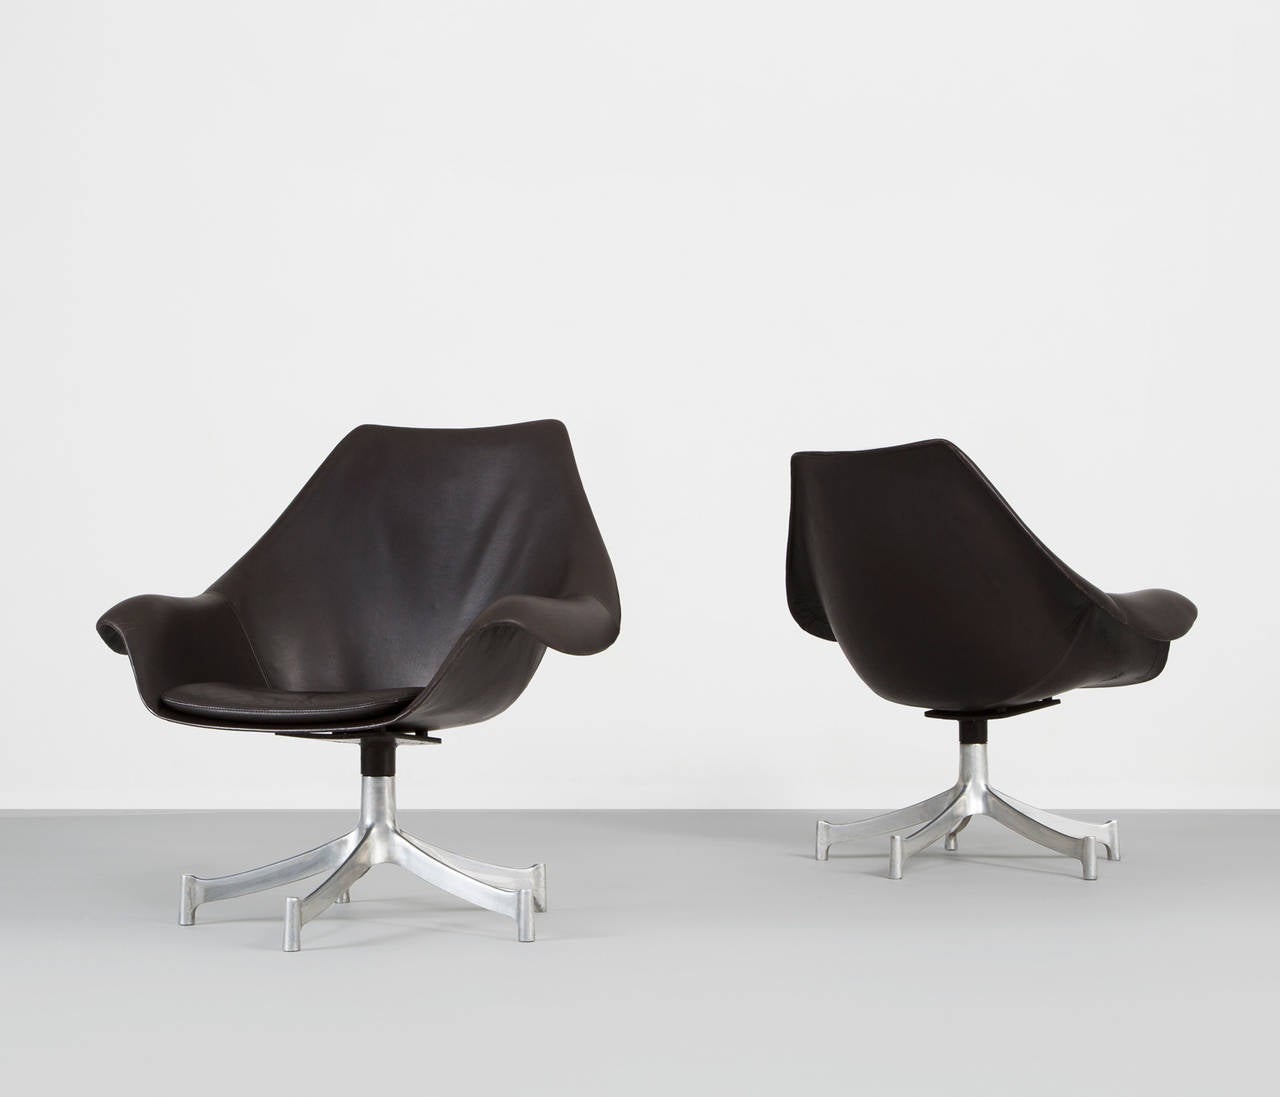 Danish Set of Two Office Chairs Designed by Jørgen Lund and Ole Larsen